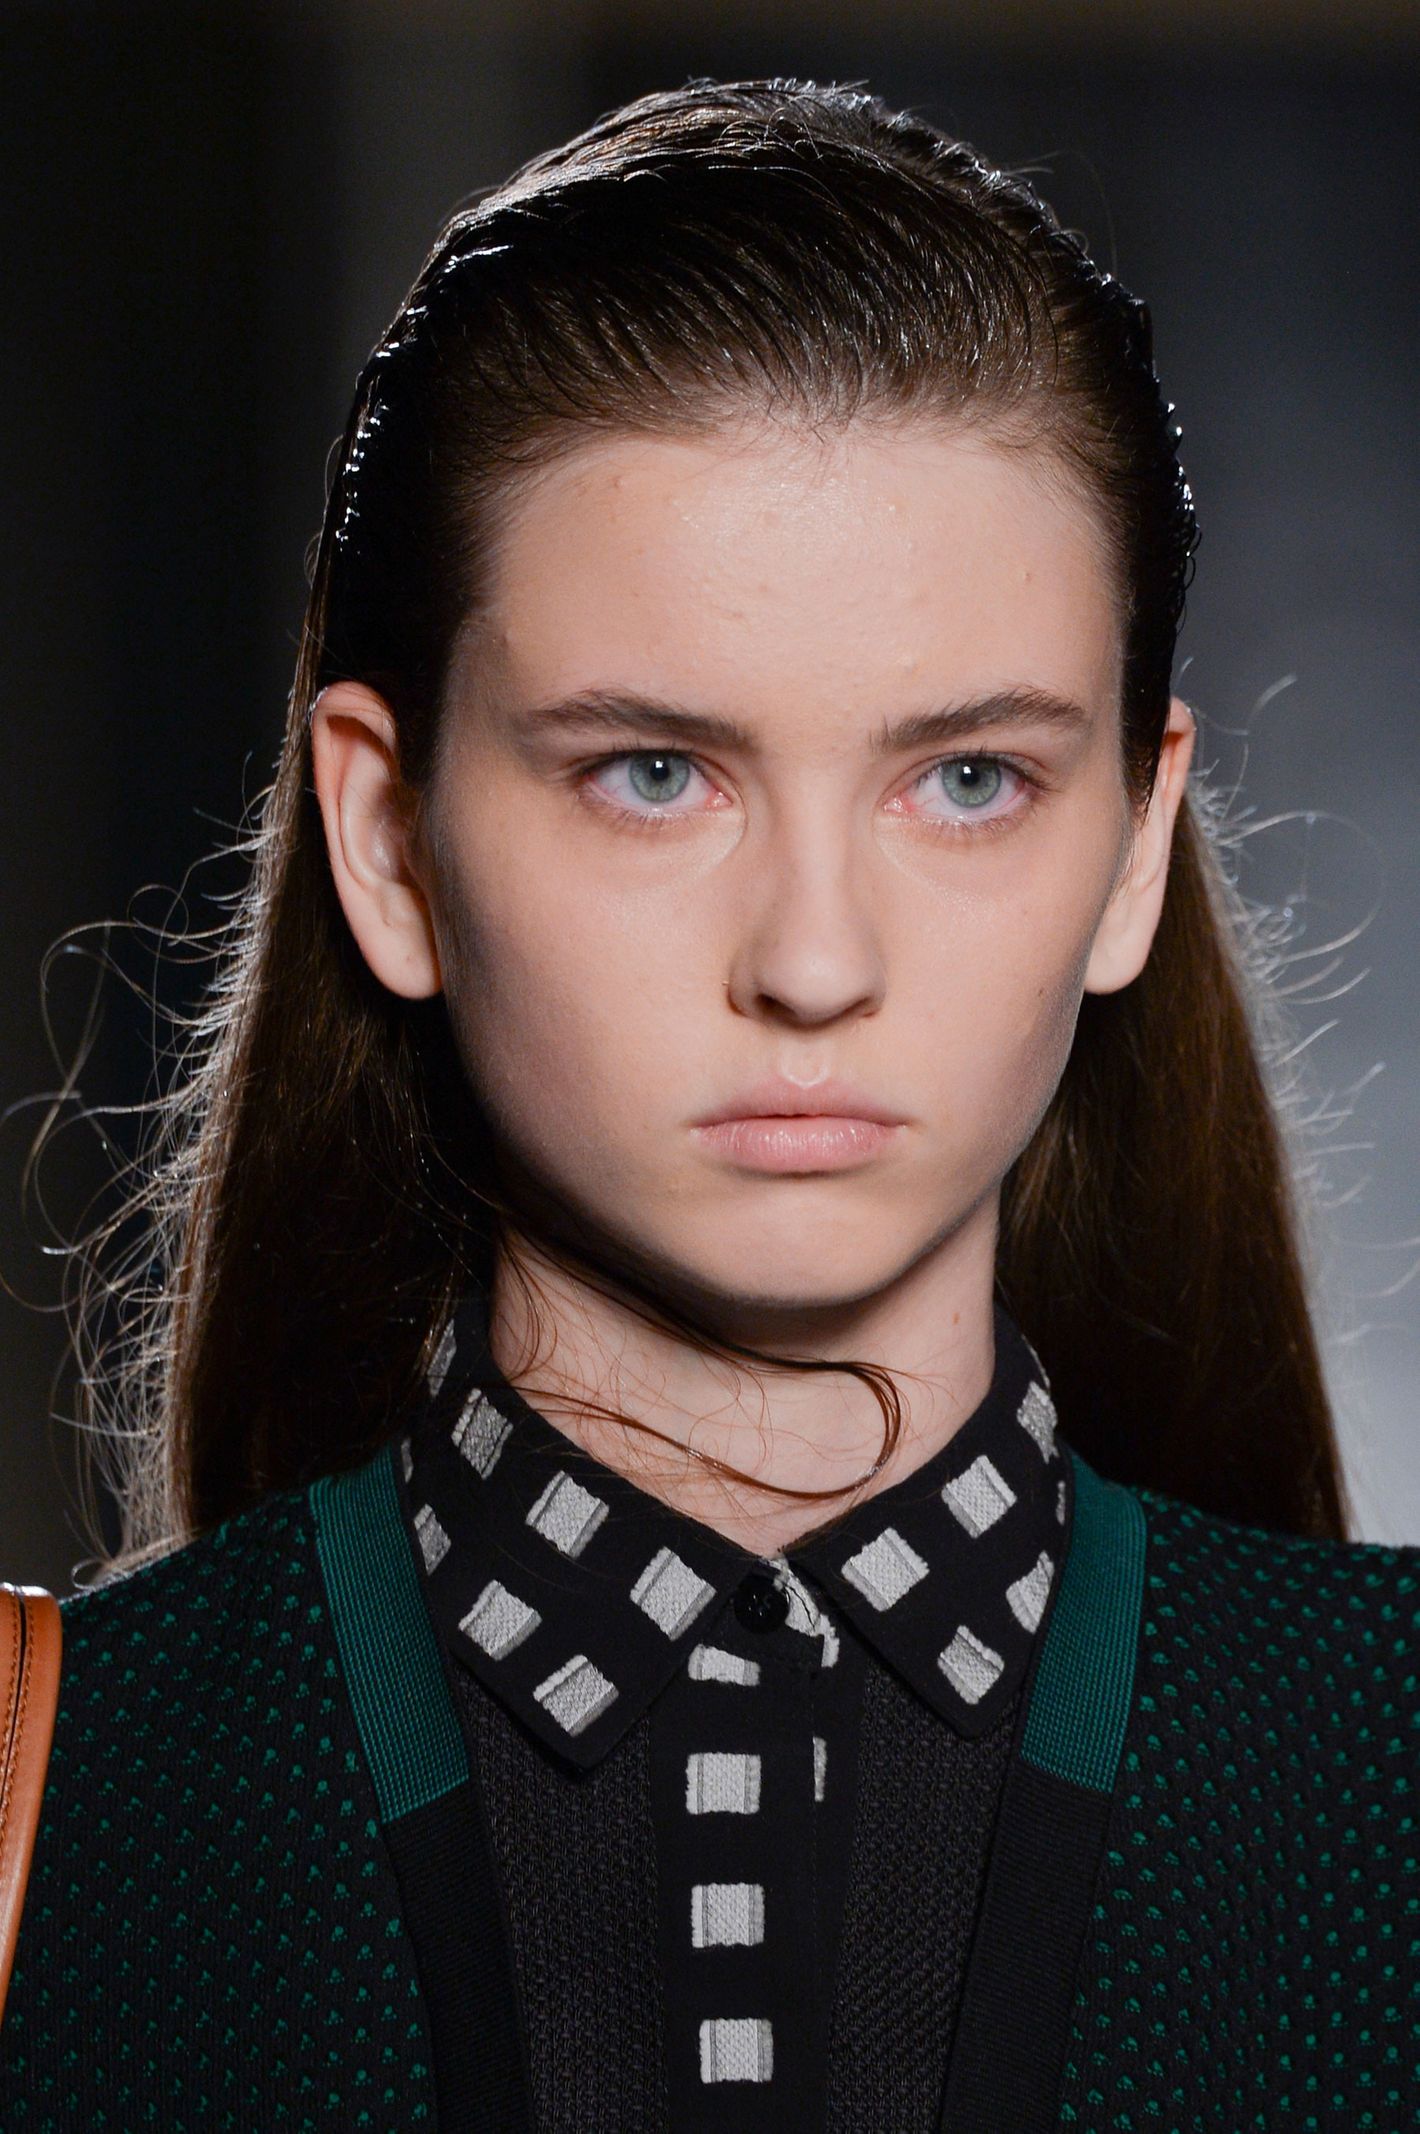 5 Backstage Beauty Lessons From the Last Days of Fashion Week